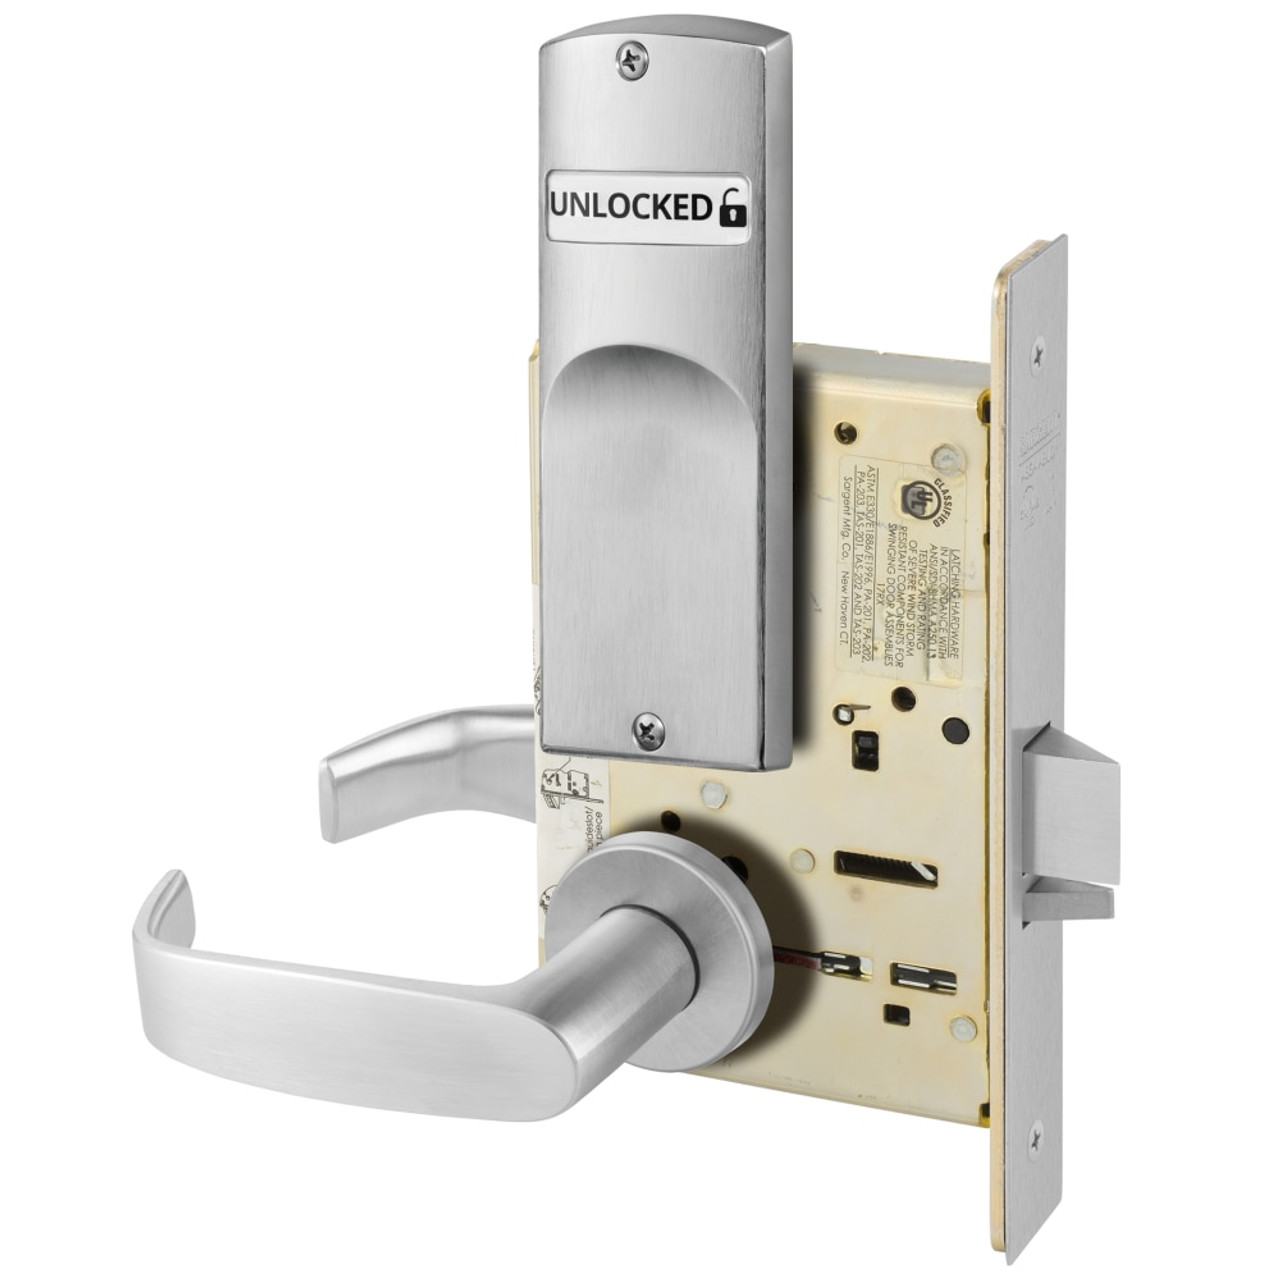 What is the part number for the lever return spring for the old M series  mortise lock?